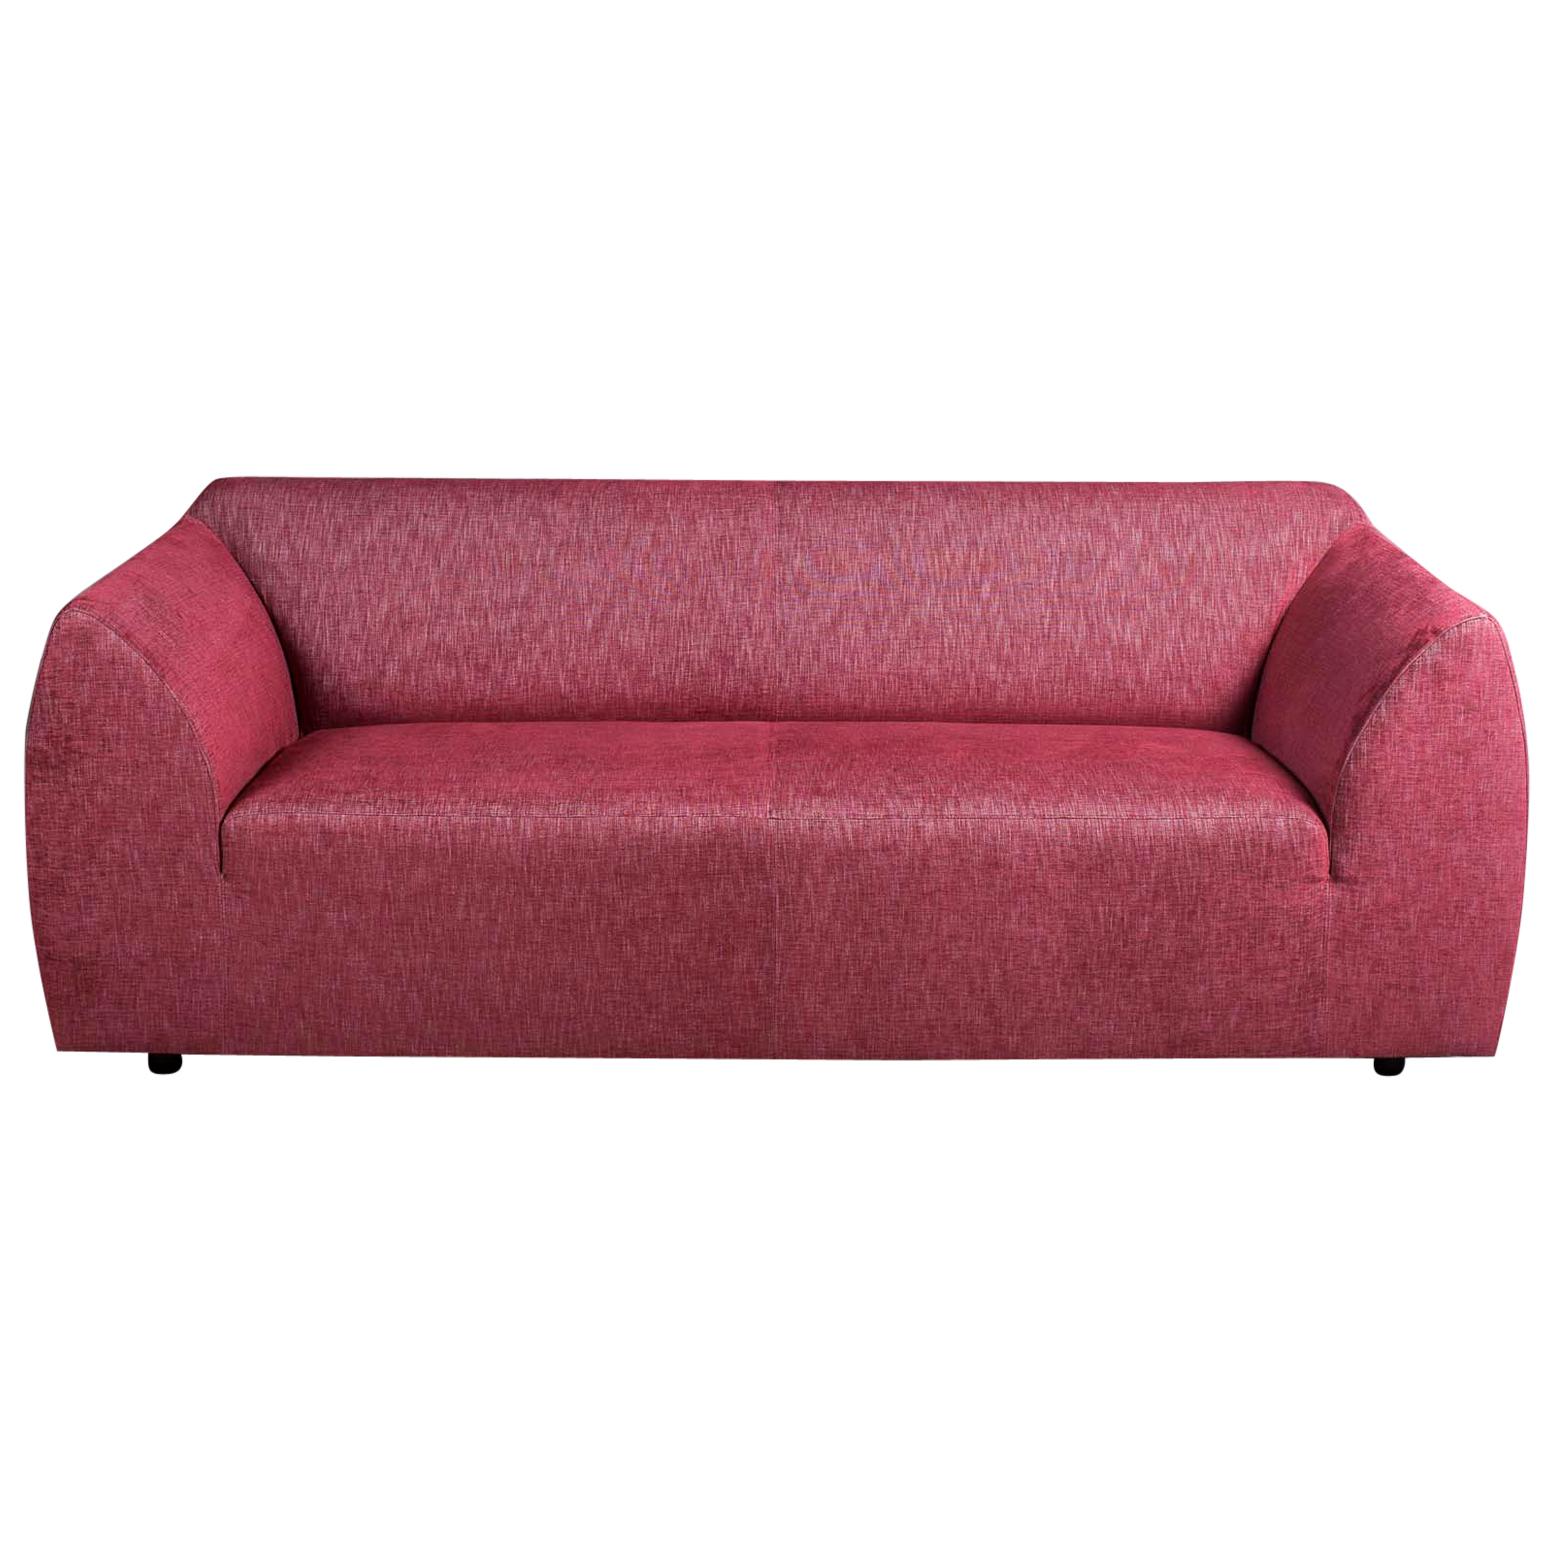 "La Jolie" Modern Indian Pink Woven Linen Sofa from Holland For Sale